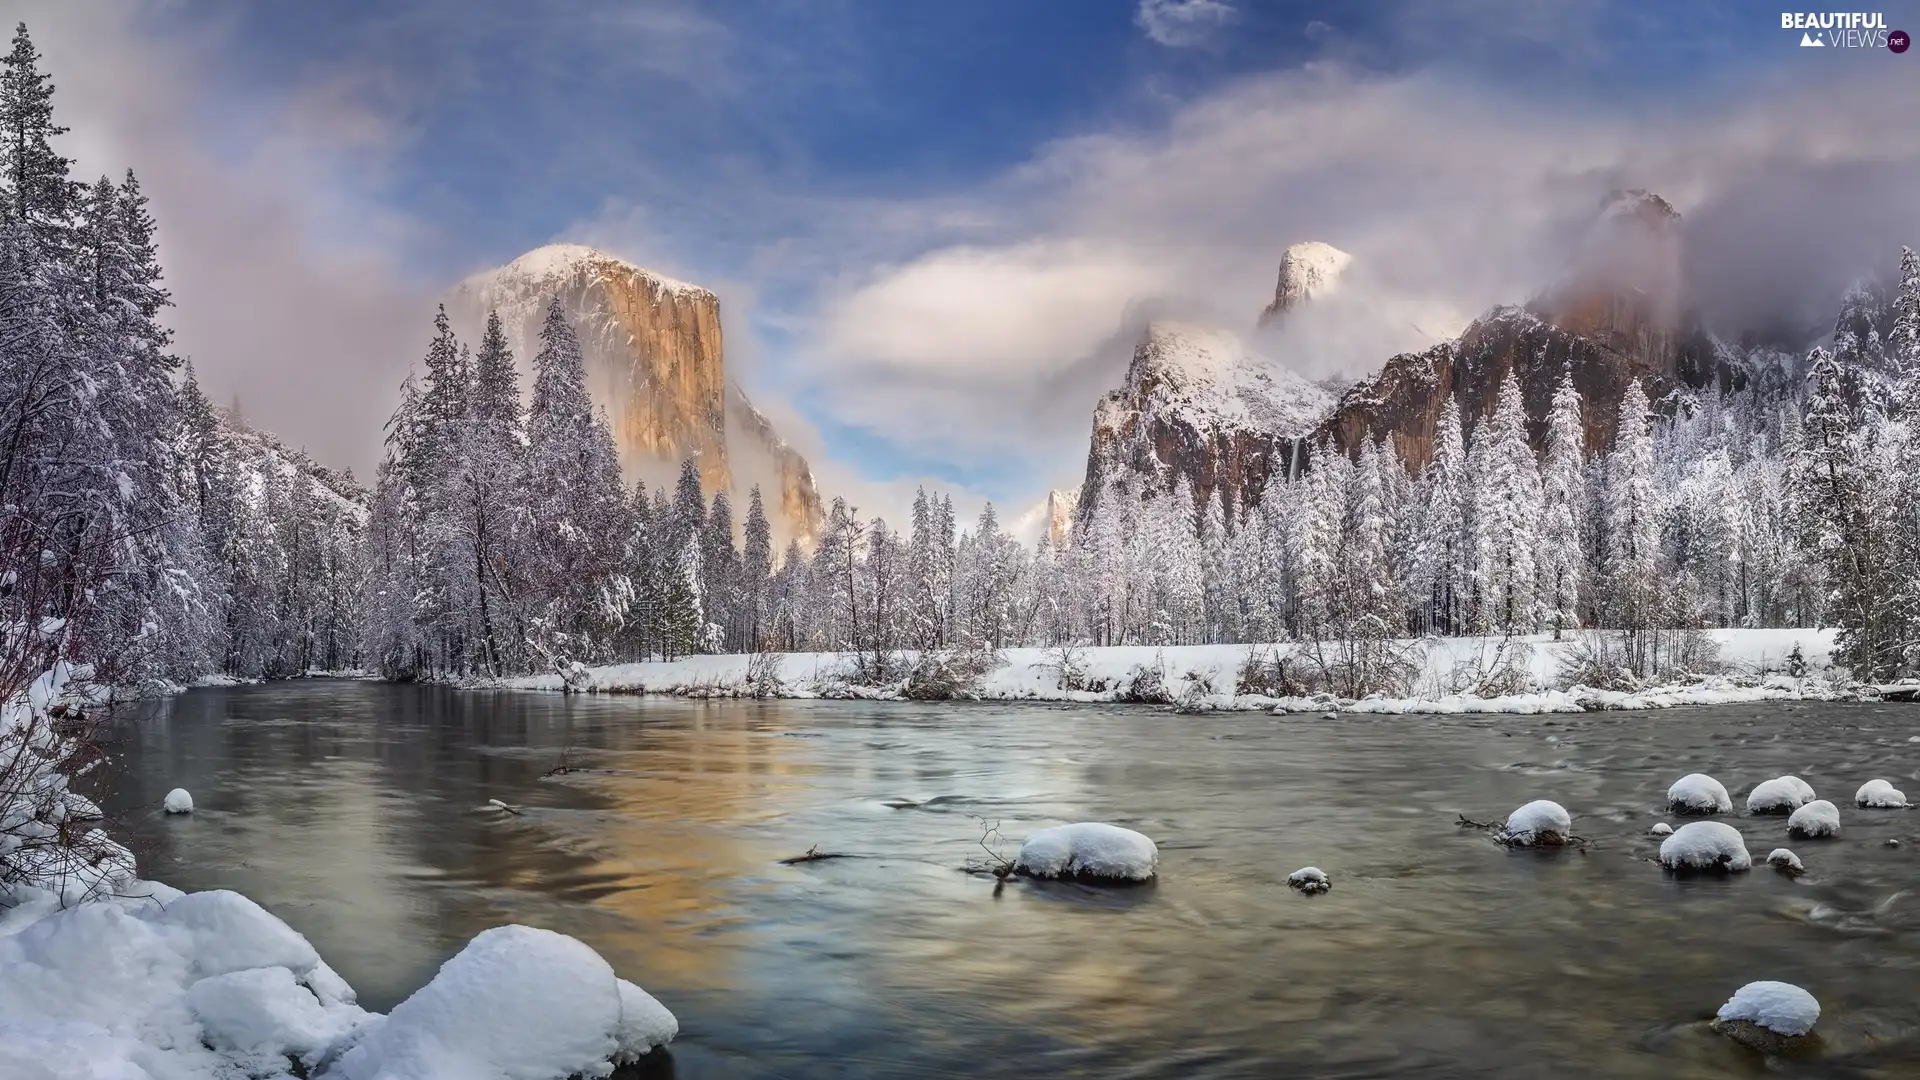 Merced River, Mountains, winter, Stones, Fog, The United States, California, viewes, trees, Yosemite National Park, clouds